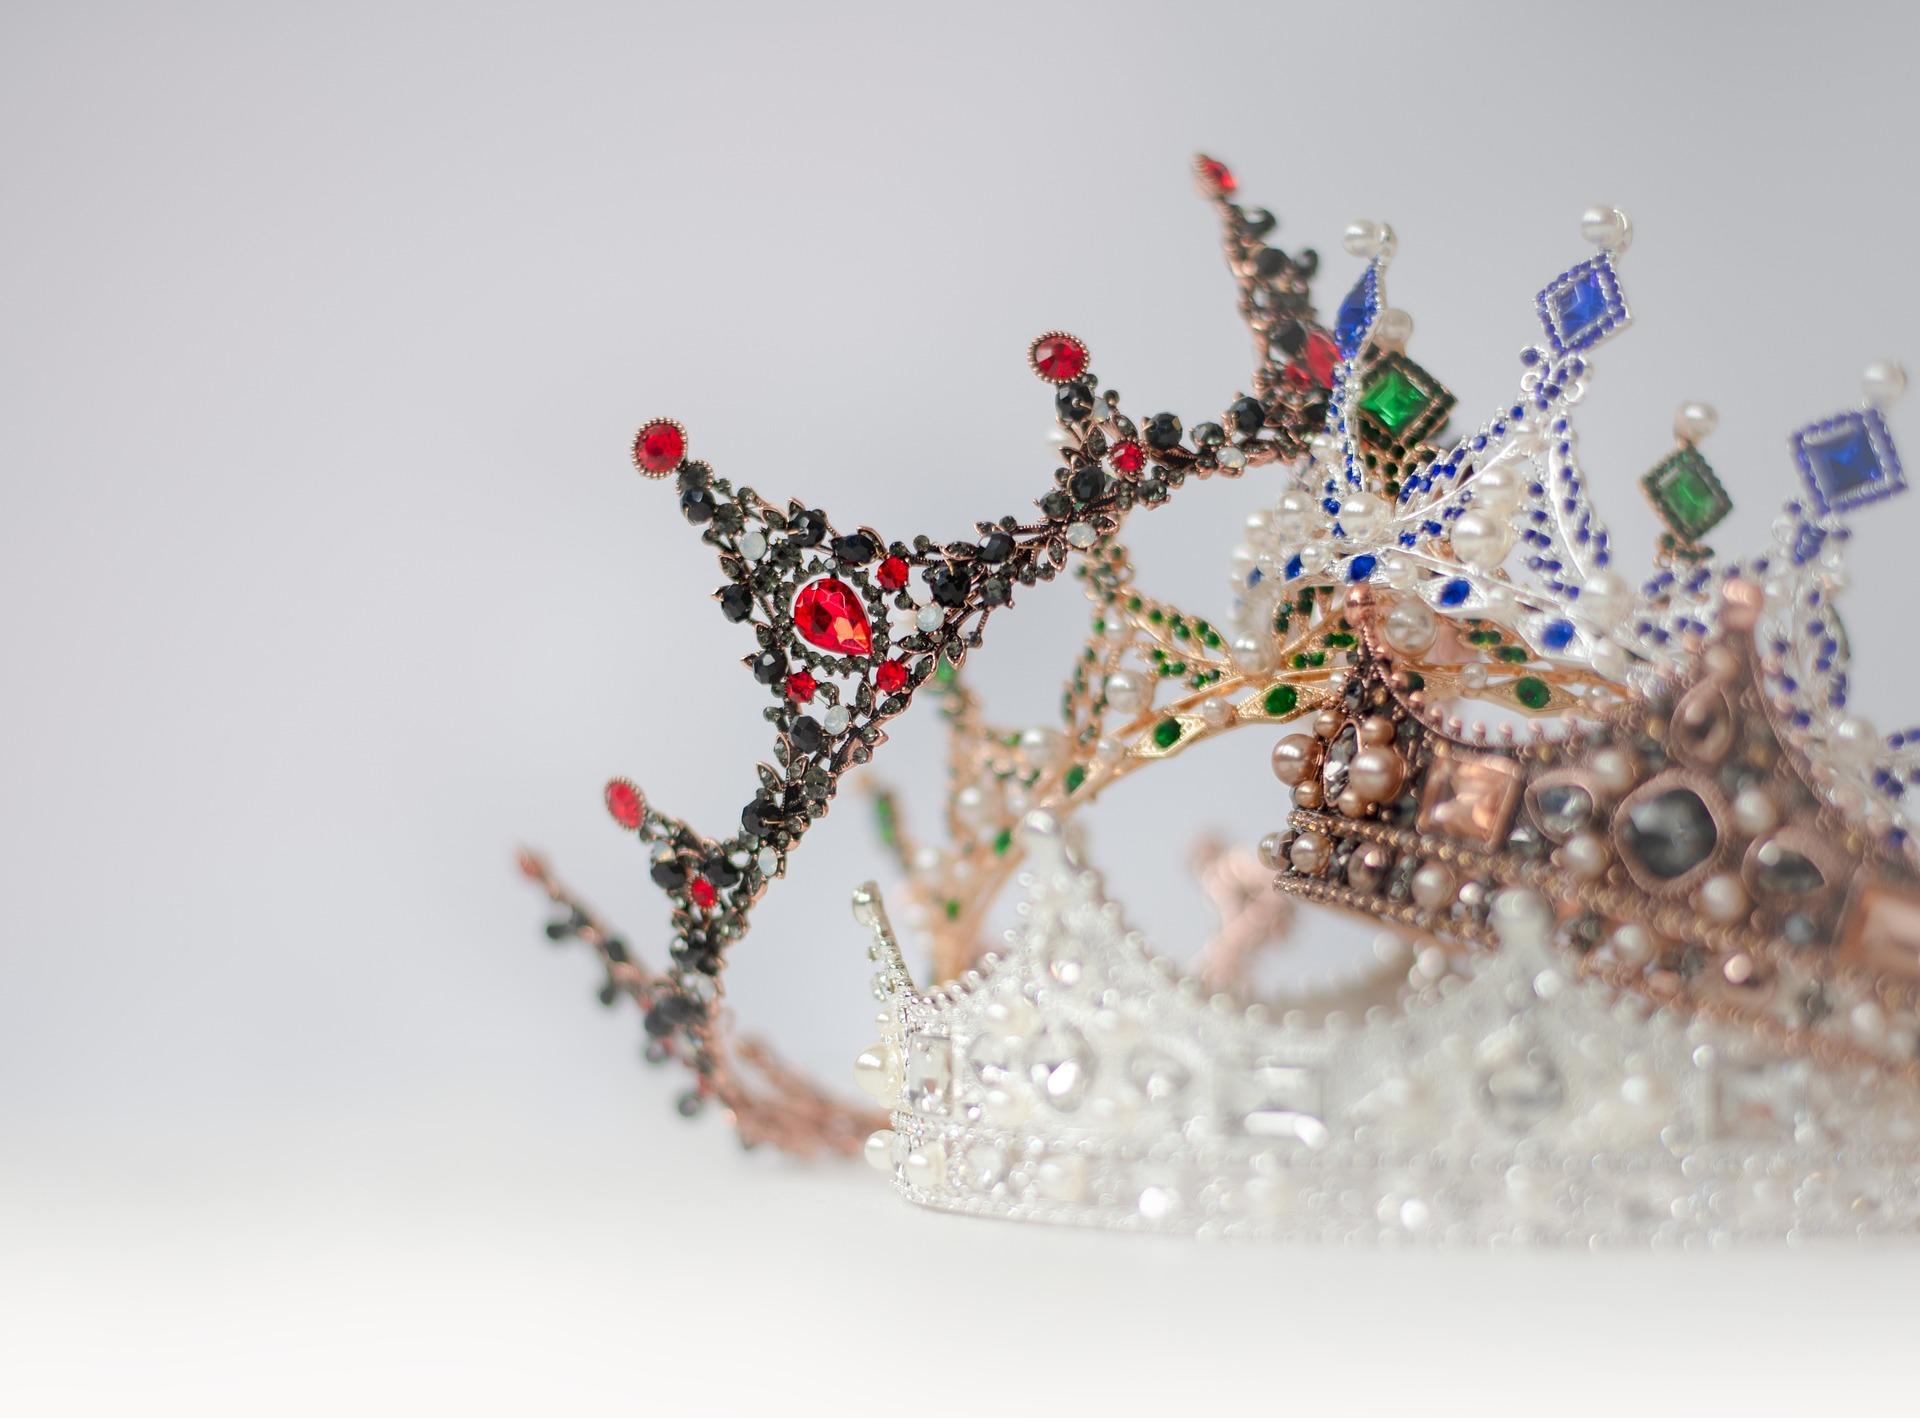 Image of crowns stacked in a pile with a white background